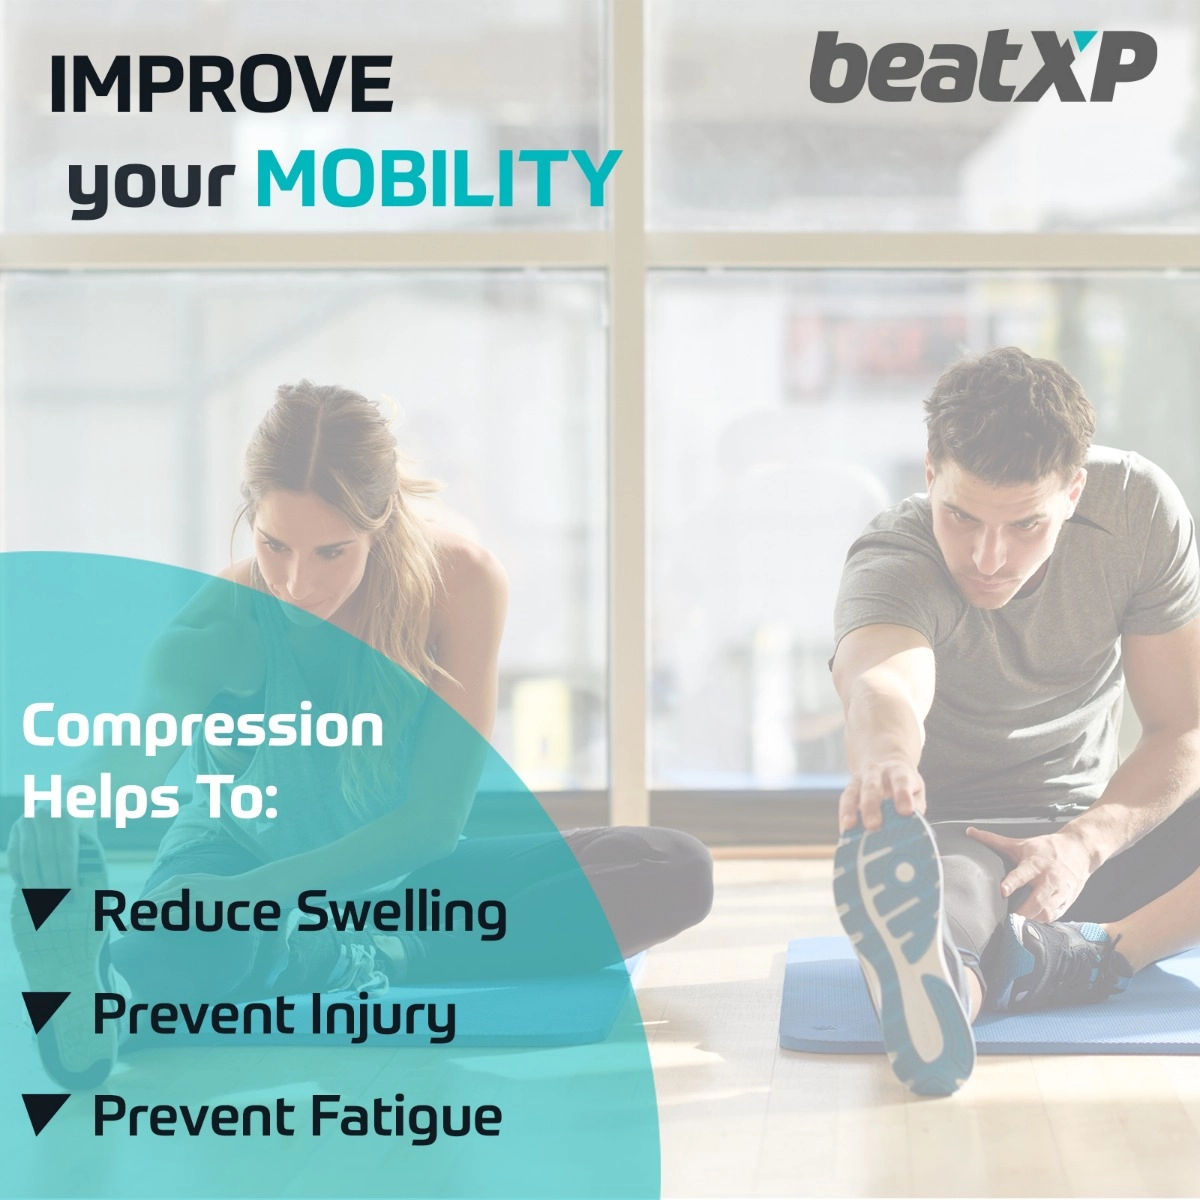 beatXP Ankle Support | Blue Compression helps